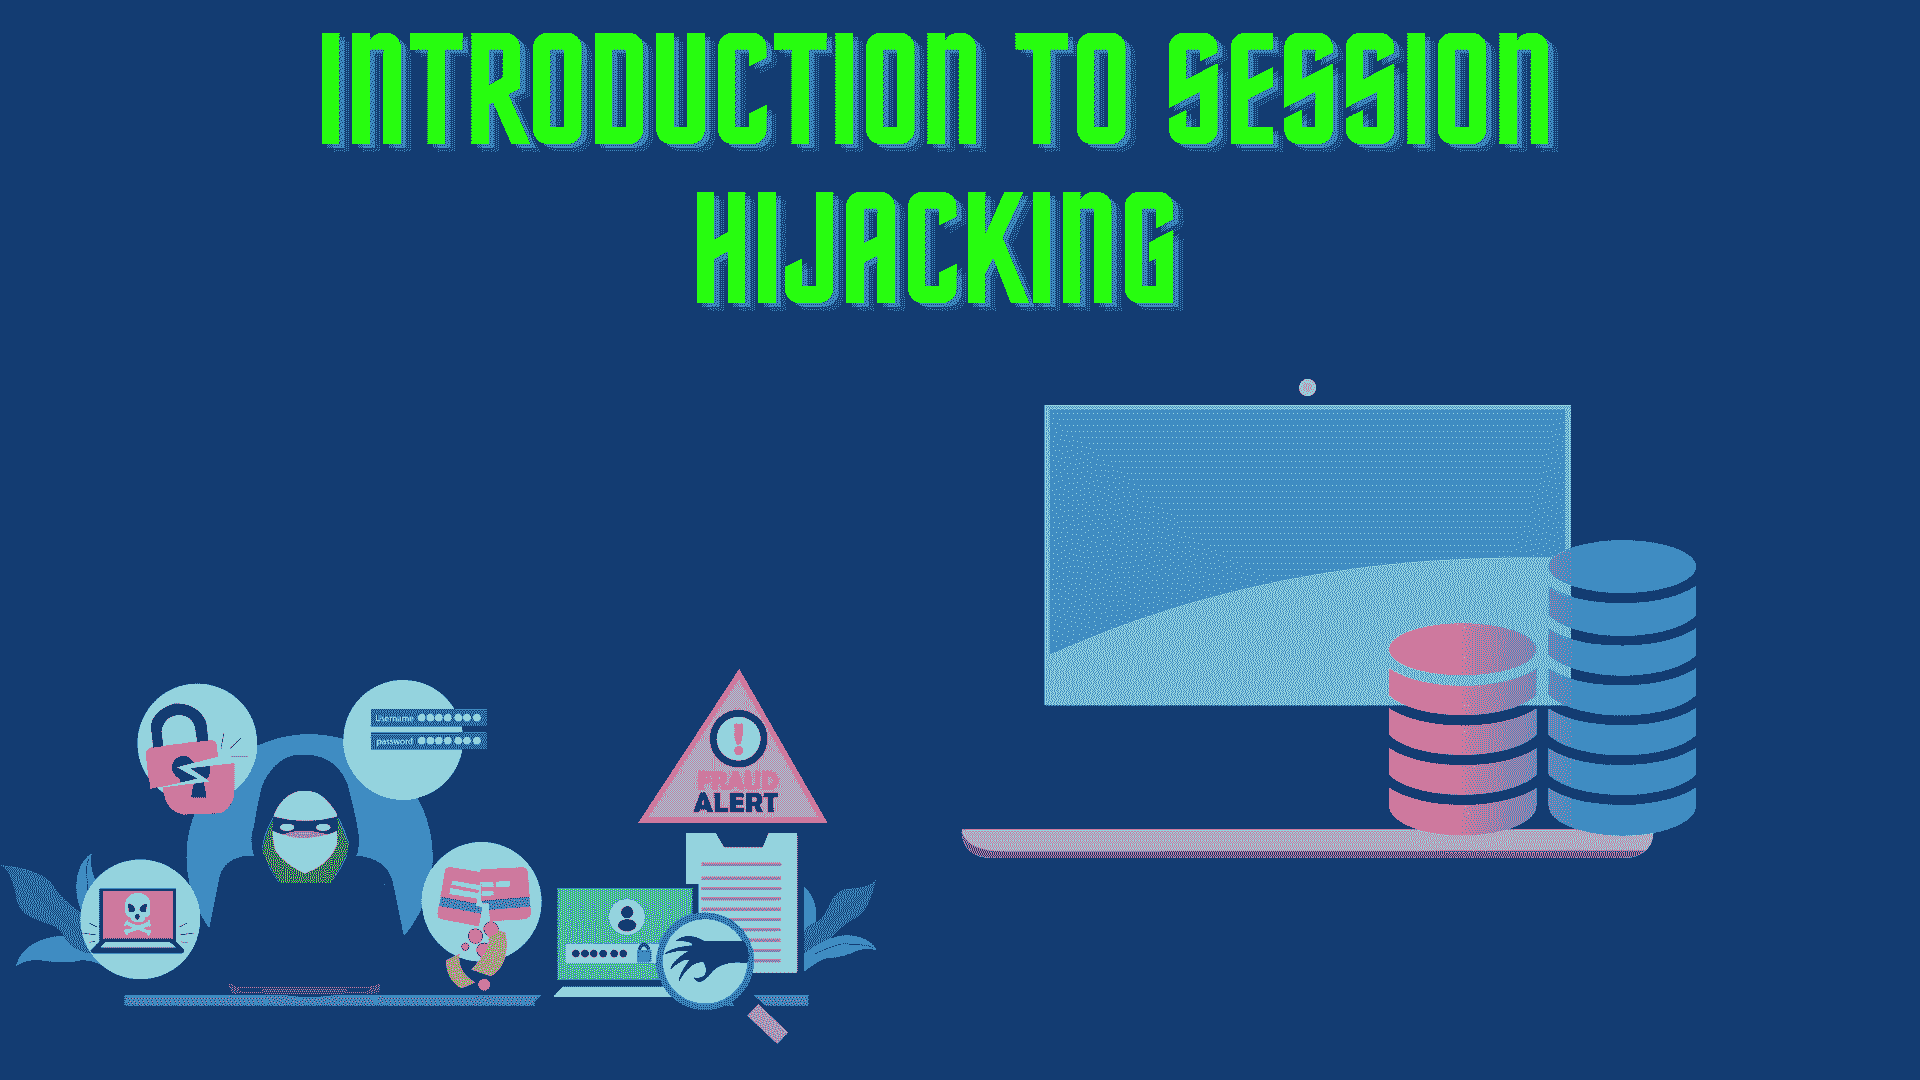 Session Hijacking, and How to Detect and Prevent It with Practicals